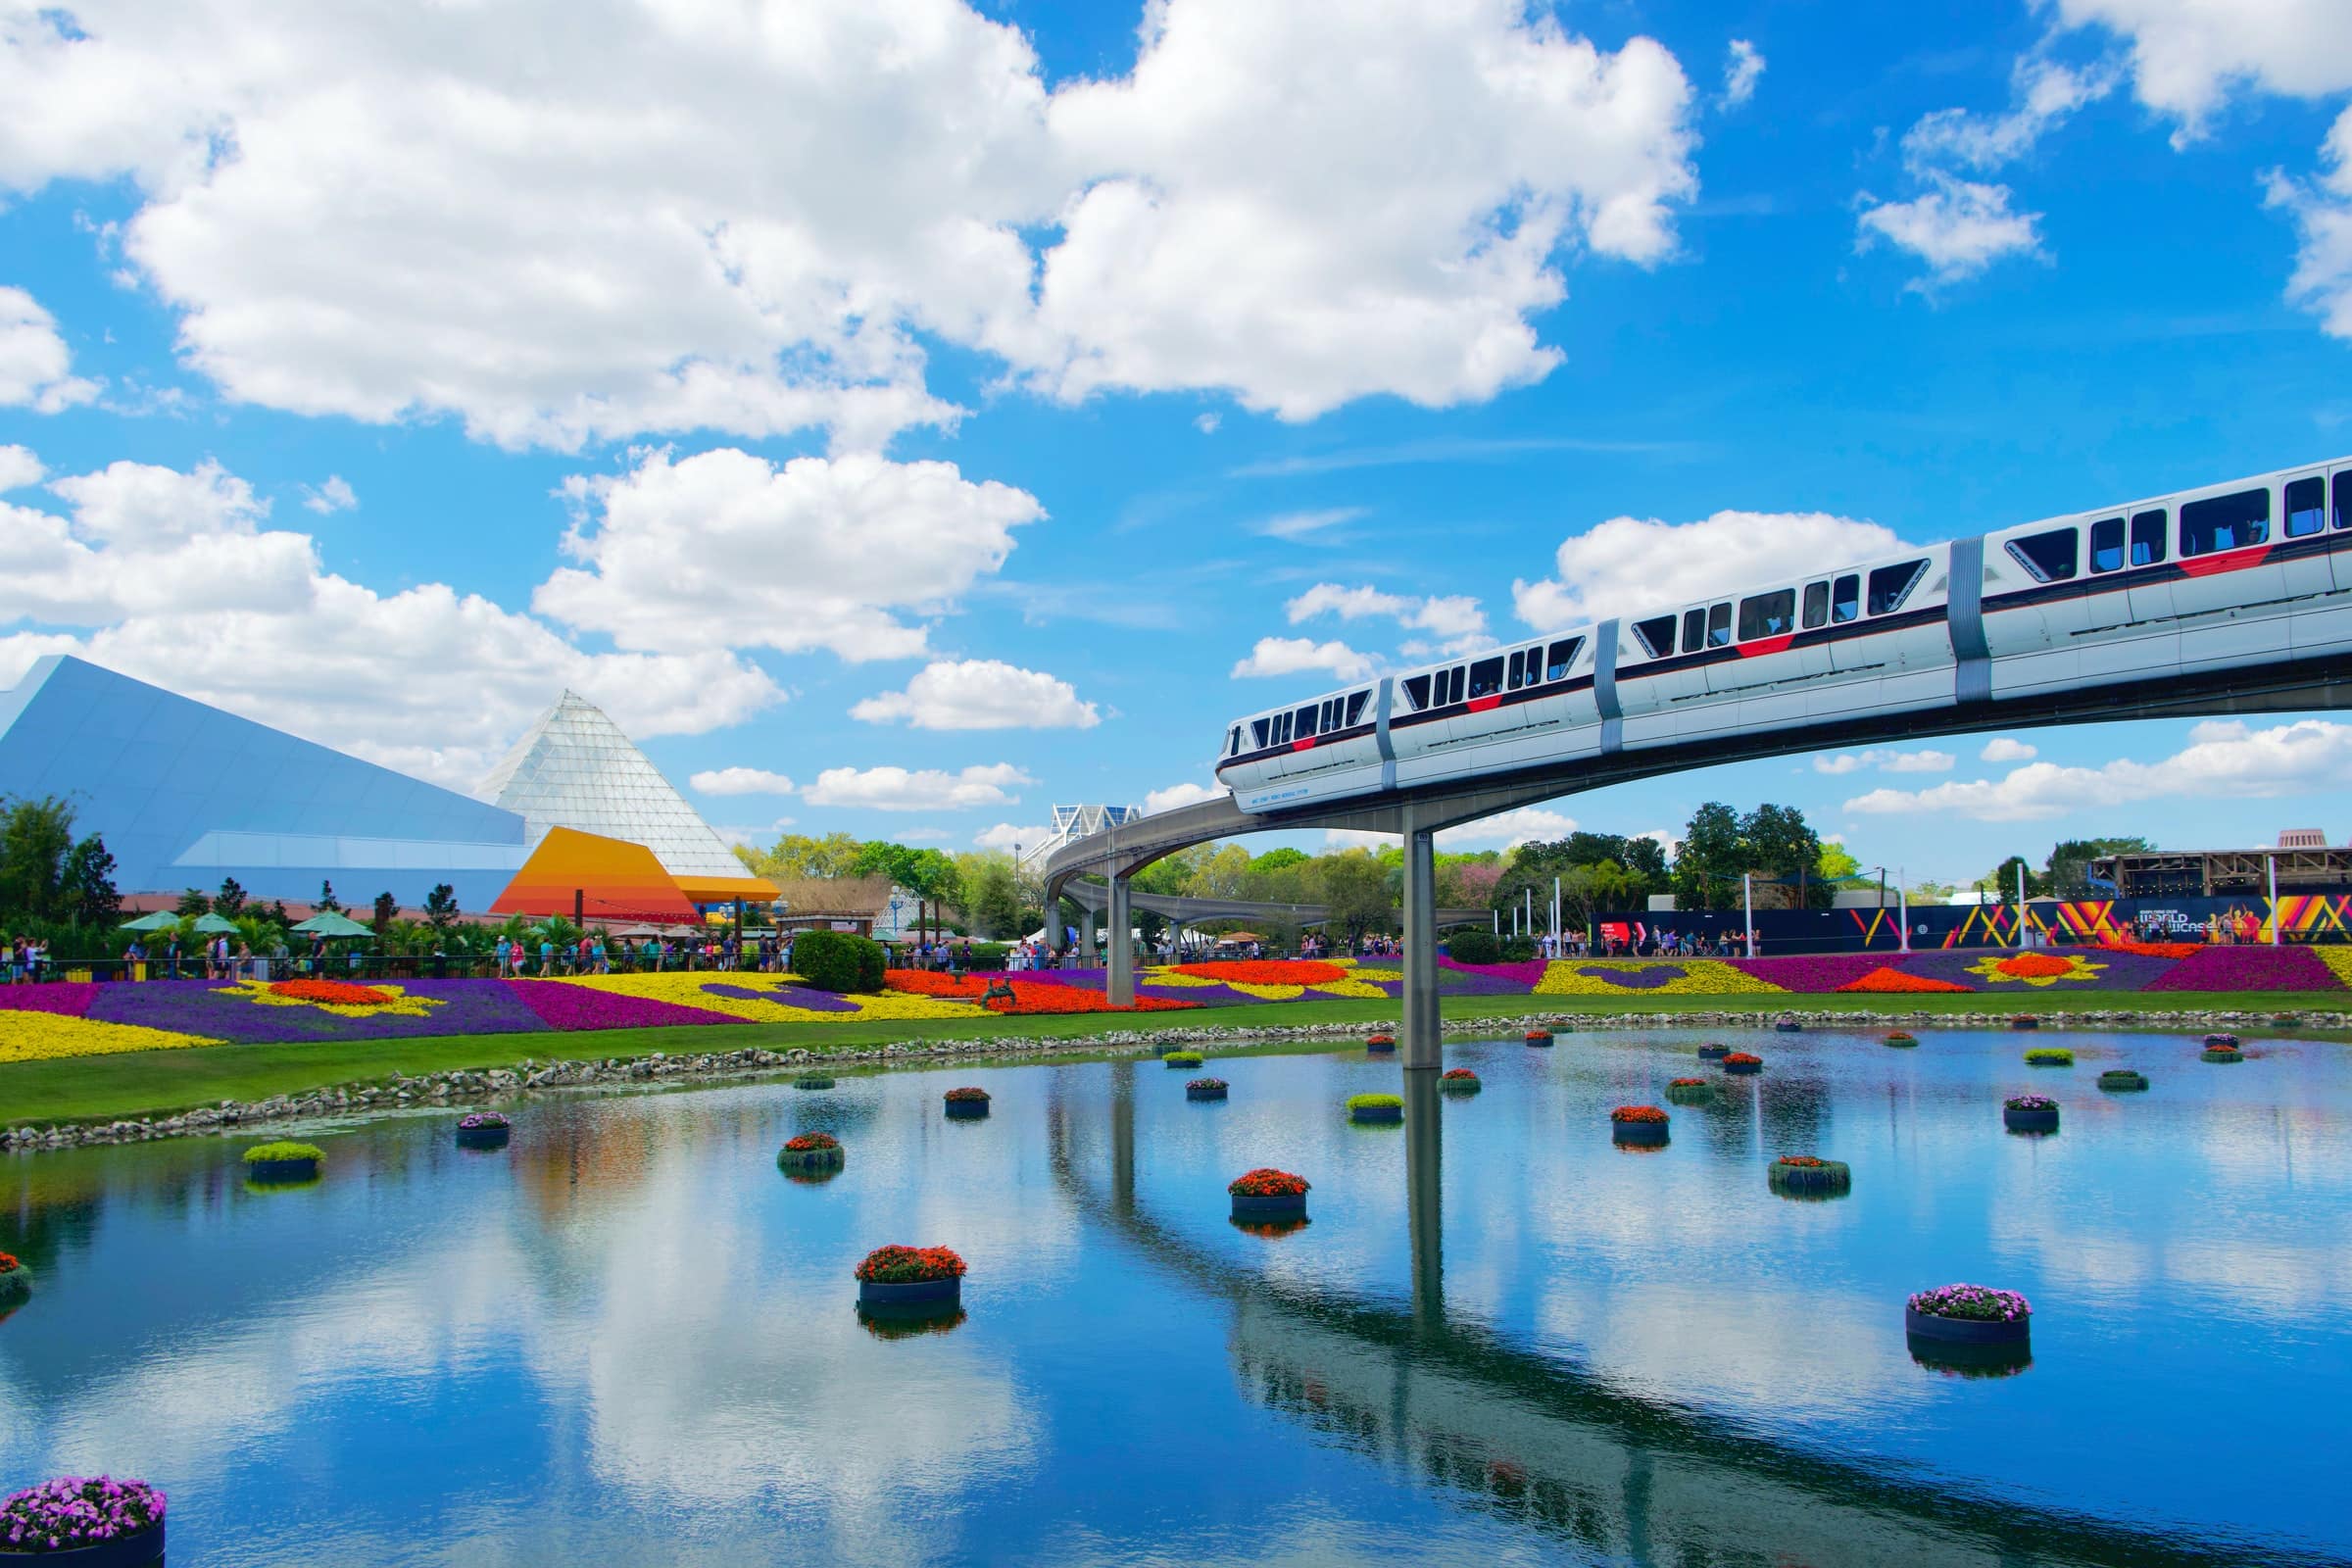 There’s a Surprising Connection Between the Las Vegas Monorail and Walt Disney